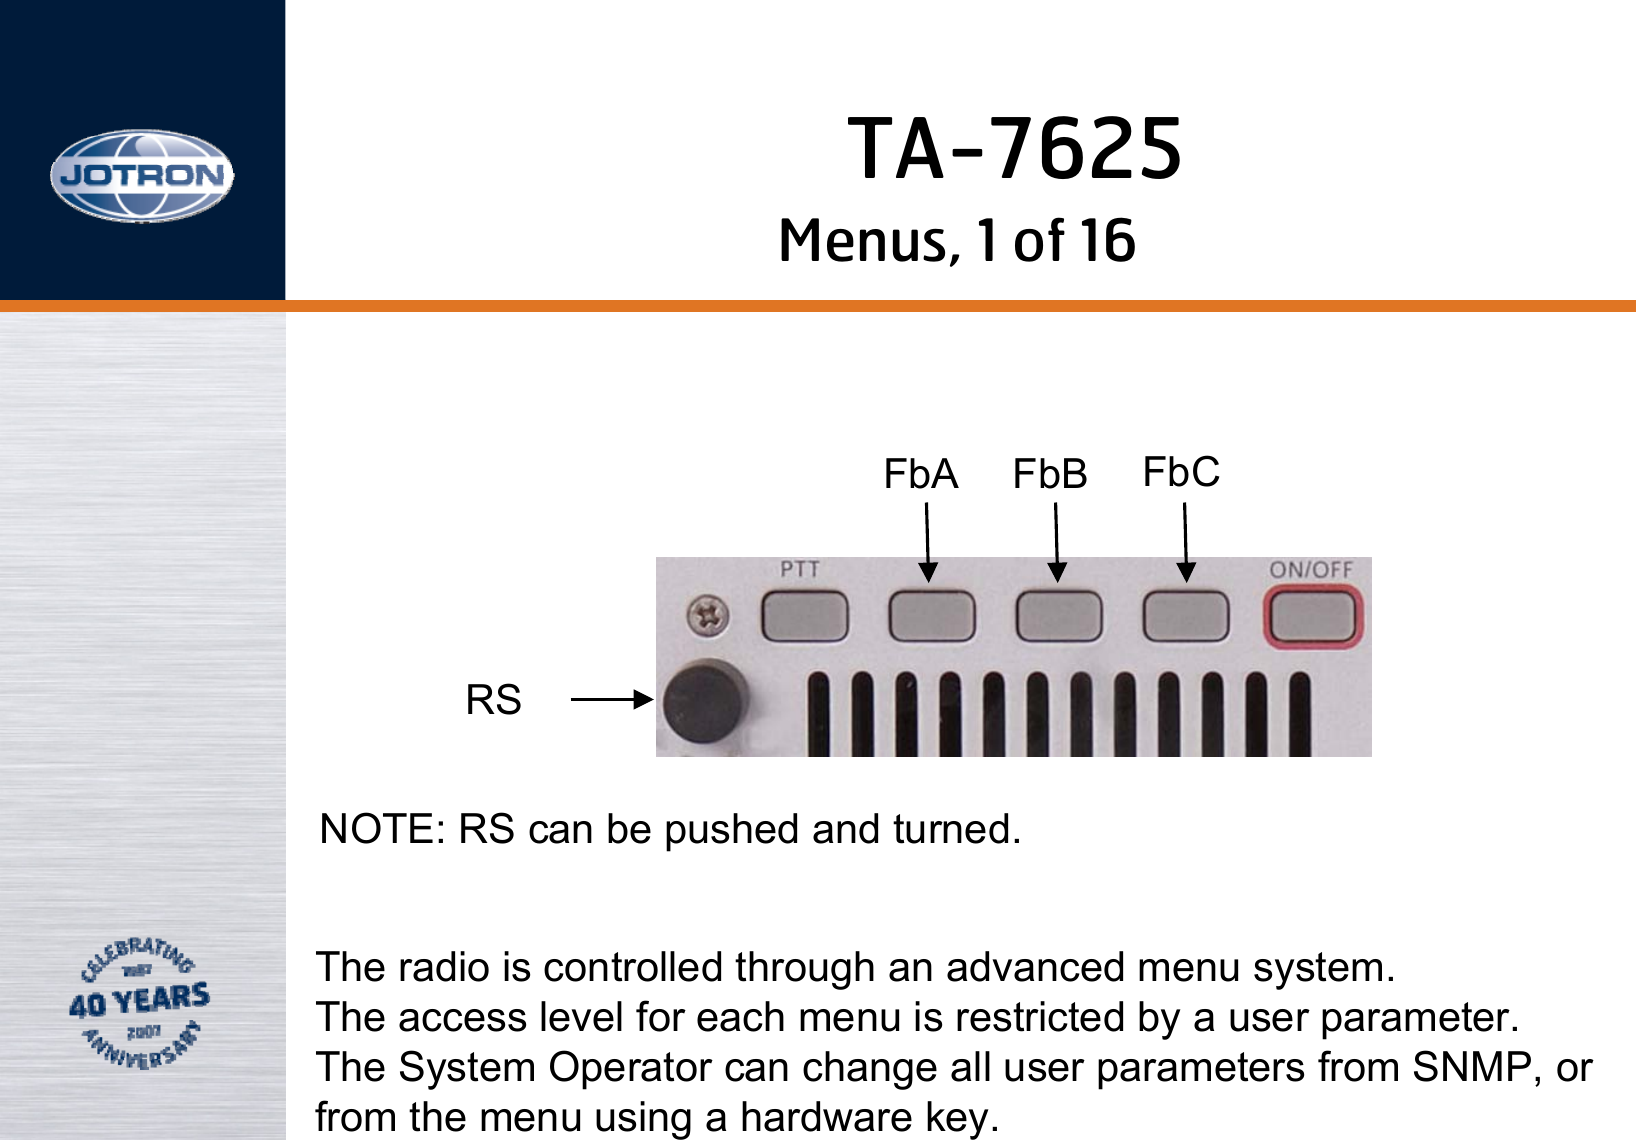 Menus, 1 of 16FbARSFbB FbCNOTE: RS can be pushed and turned.The radio is controlled through an advanced menu system.The access level for each menu is restricted by a user parameter. The System Operator can change all user parameters from SNMP, orfrom the menu using a hardware key.TA-7625